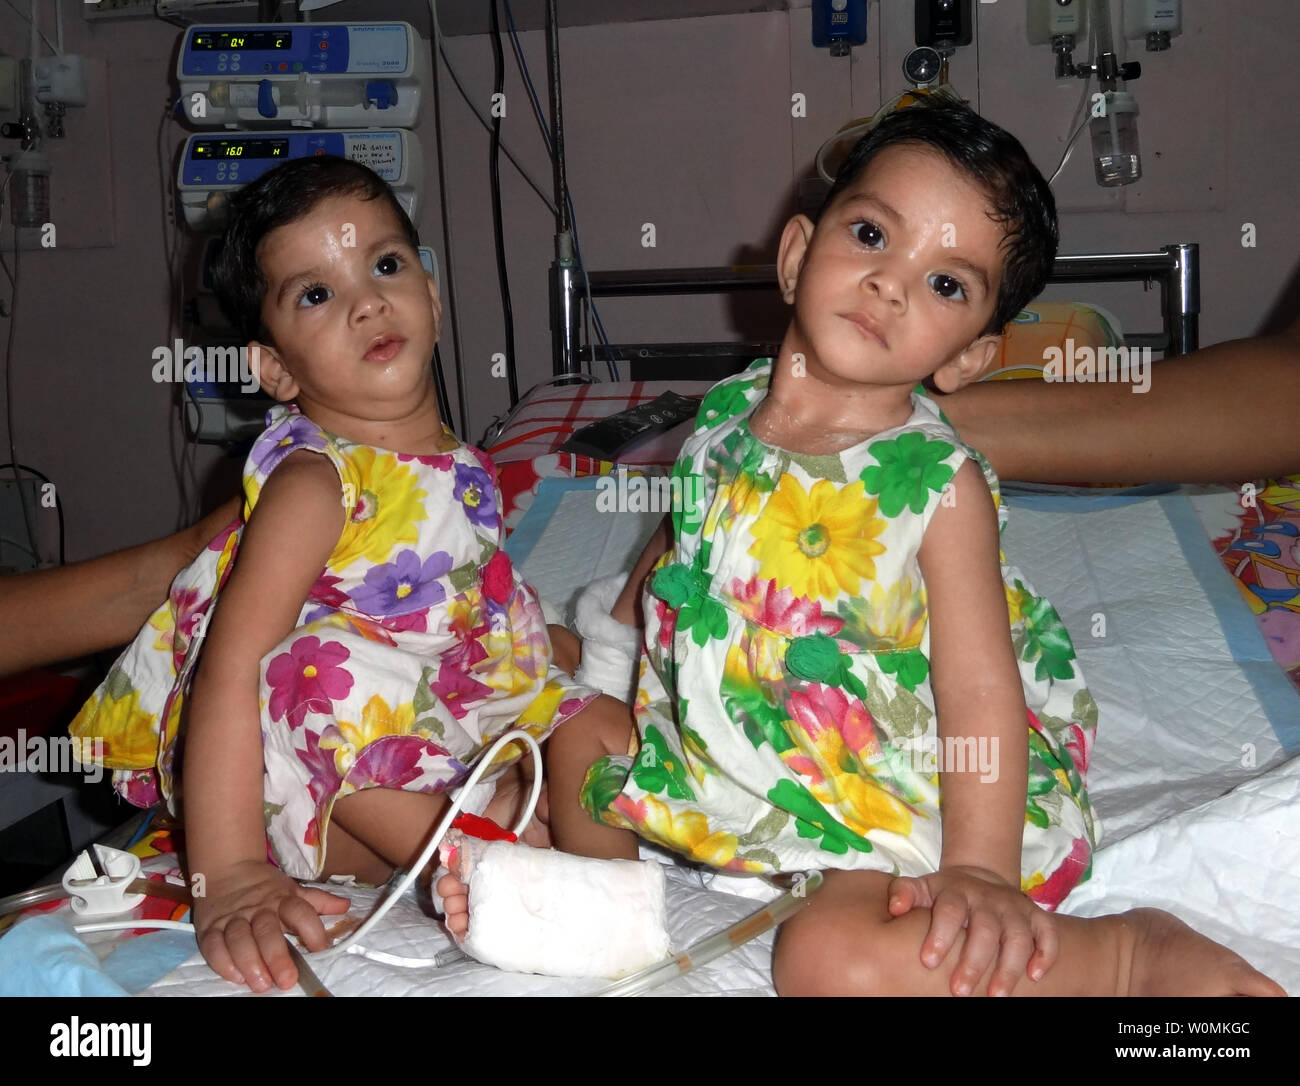 Formerly conjoined twins, Stuti (L) and Aradhana sit side by side at Missionary Hospital in Padhar, Betul, central India on June 28, 2012. The one-year-olds were successfully separated after a 12-hour surgery on June 20, conducted by a team of 34 medical experts, including 23 doctors, drawn from India and abroad.The one-year-old sisters were joined at heart and liver.            UPI Photo/ STR. Stock Photo